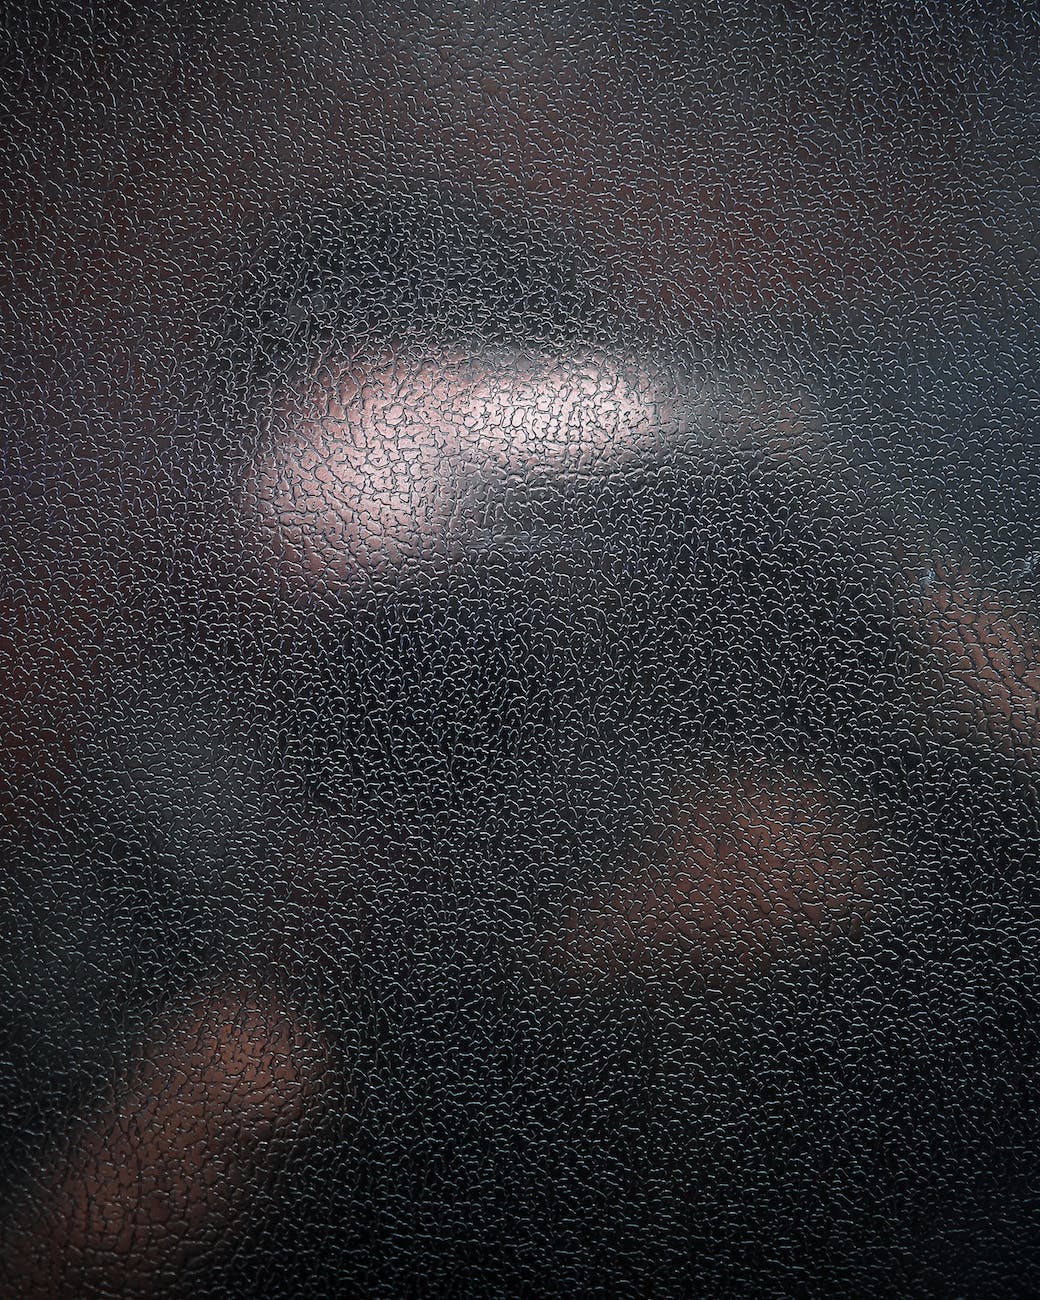 Black and Brown Leather Surface